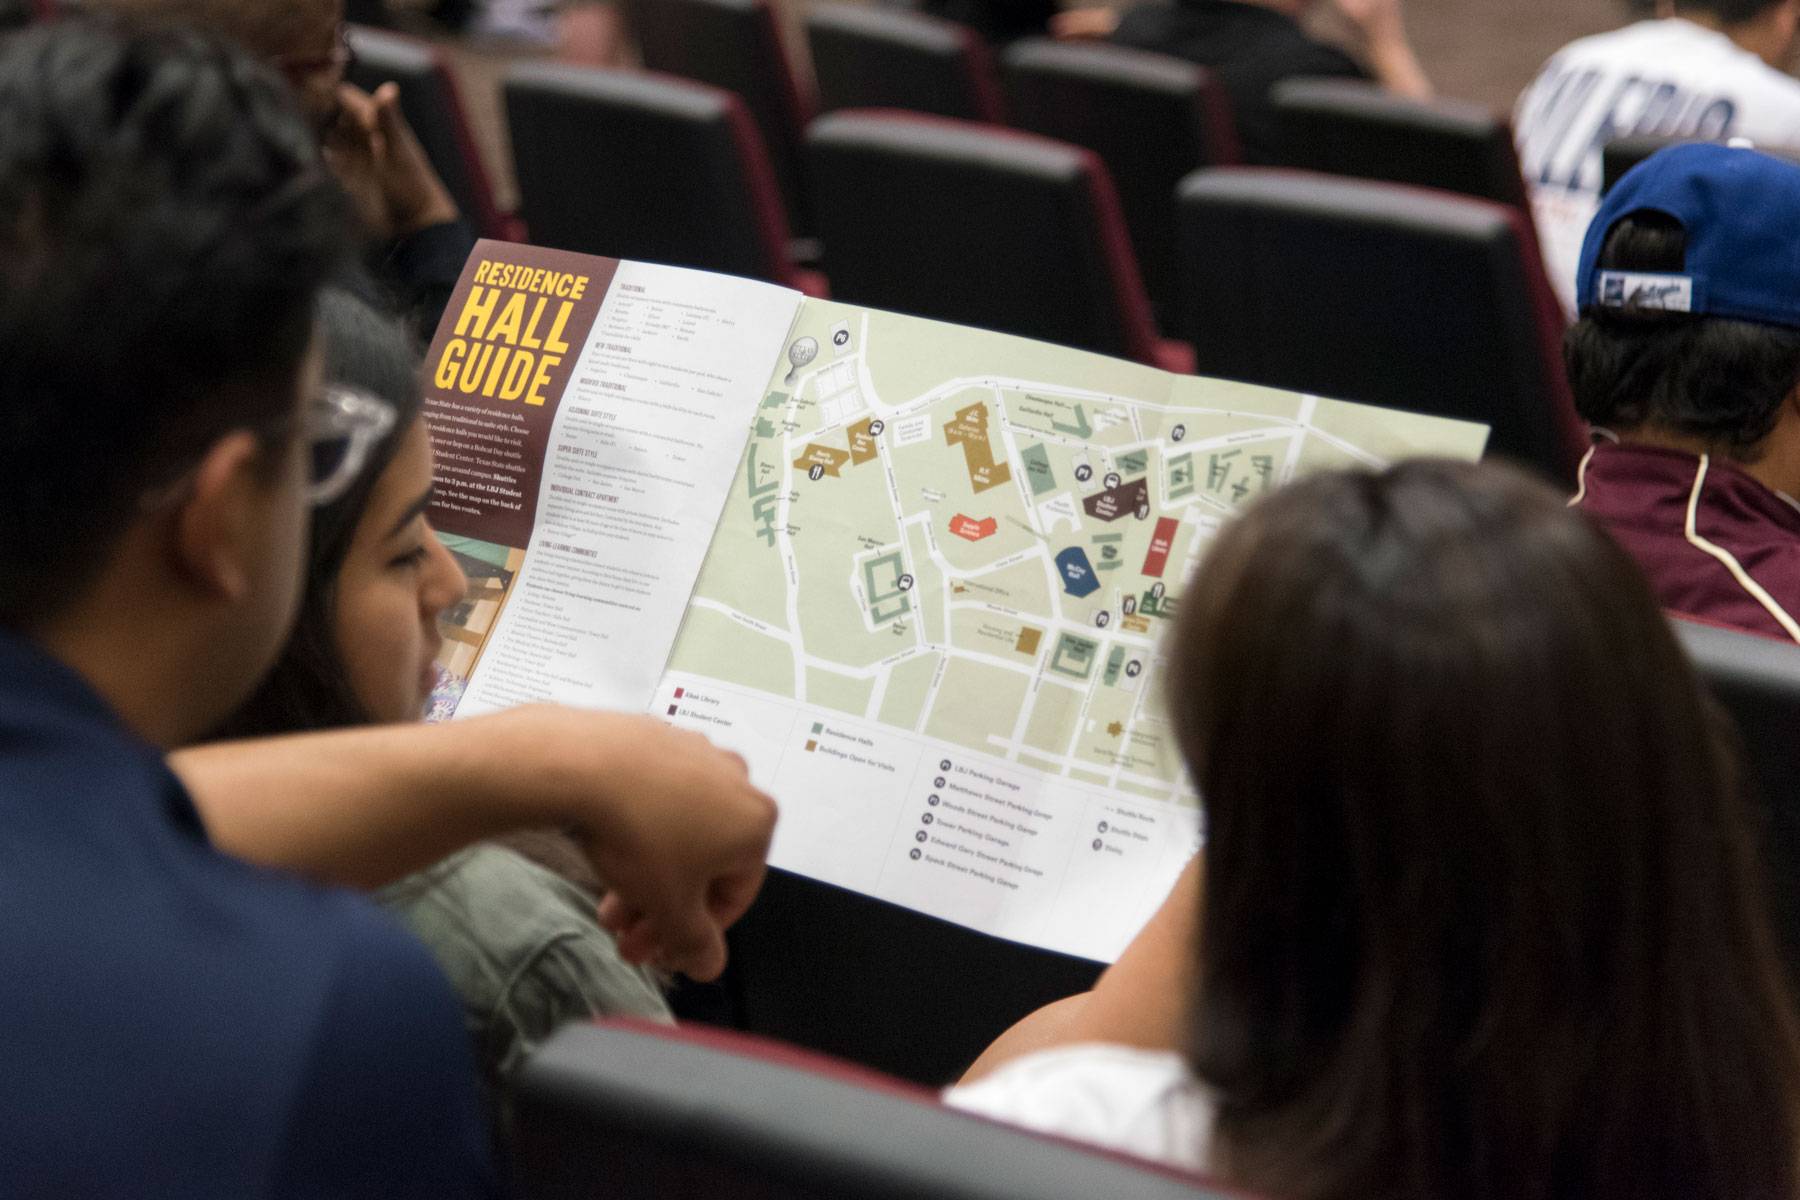 A group of students see what Texas State has to offer at an event in the LBJ student center